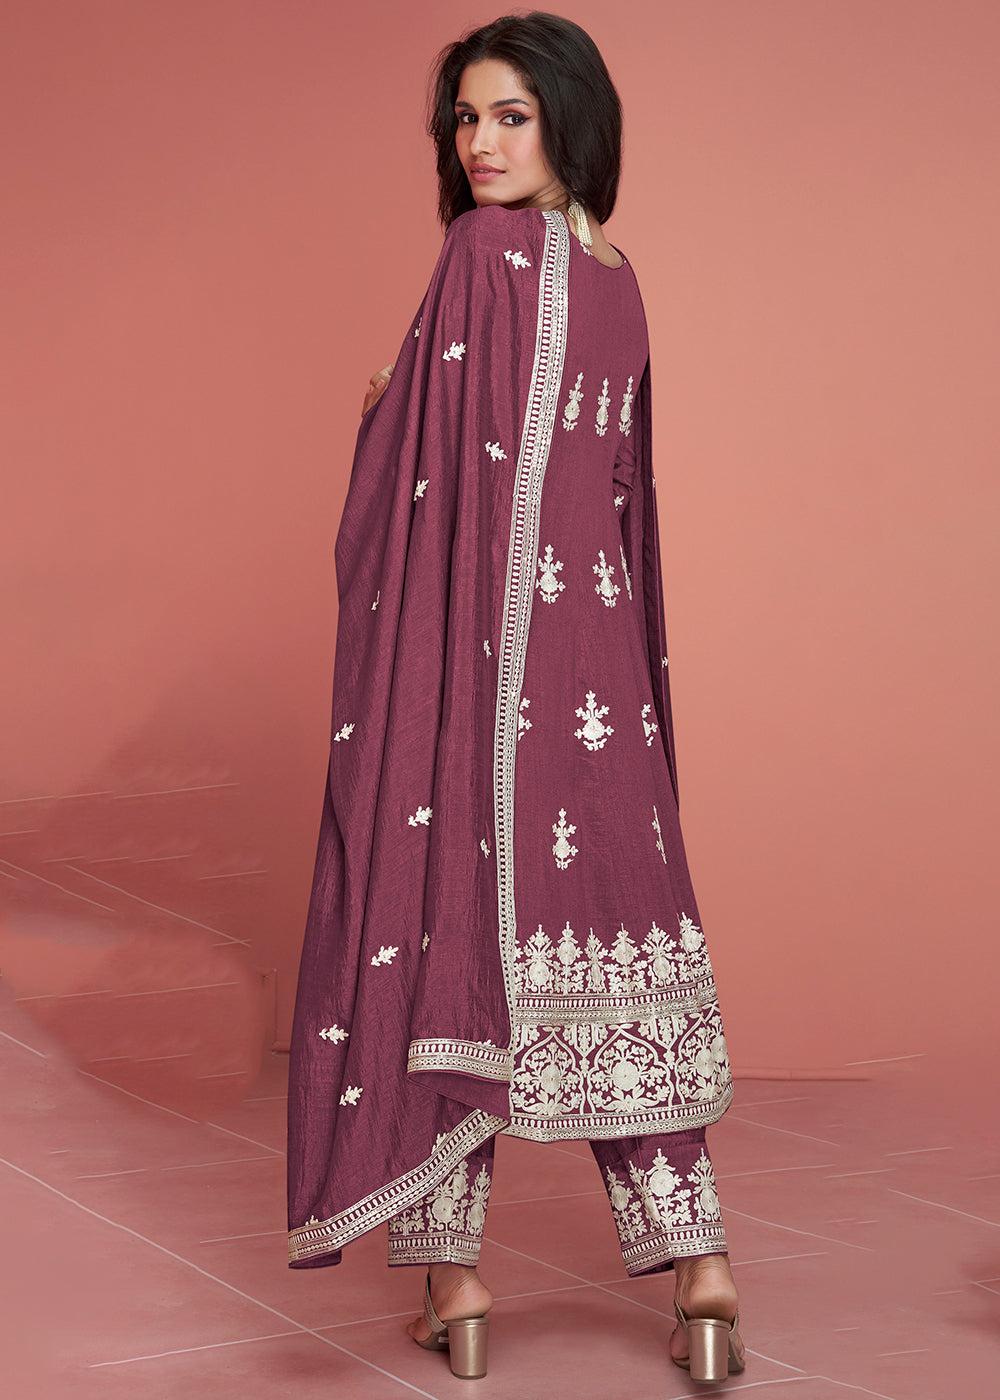 Buy Now Punjabi Style Silk Embroidered Salwar Suit in Dusky Purple Online in USA, UK, Canada, Germany, Australia & Worldwide at Empress Clothing.